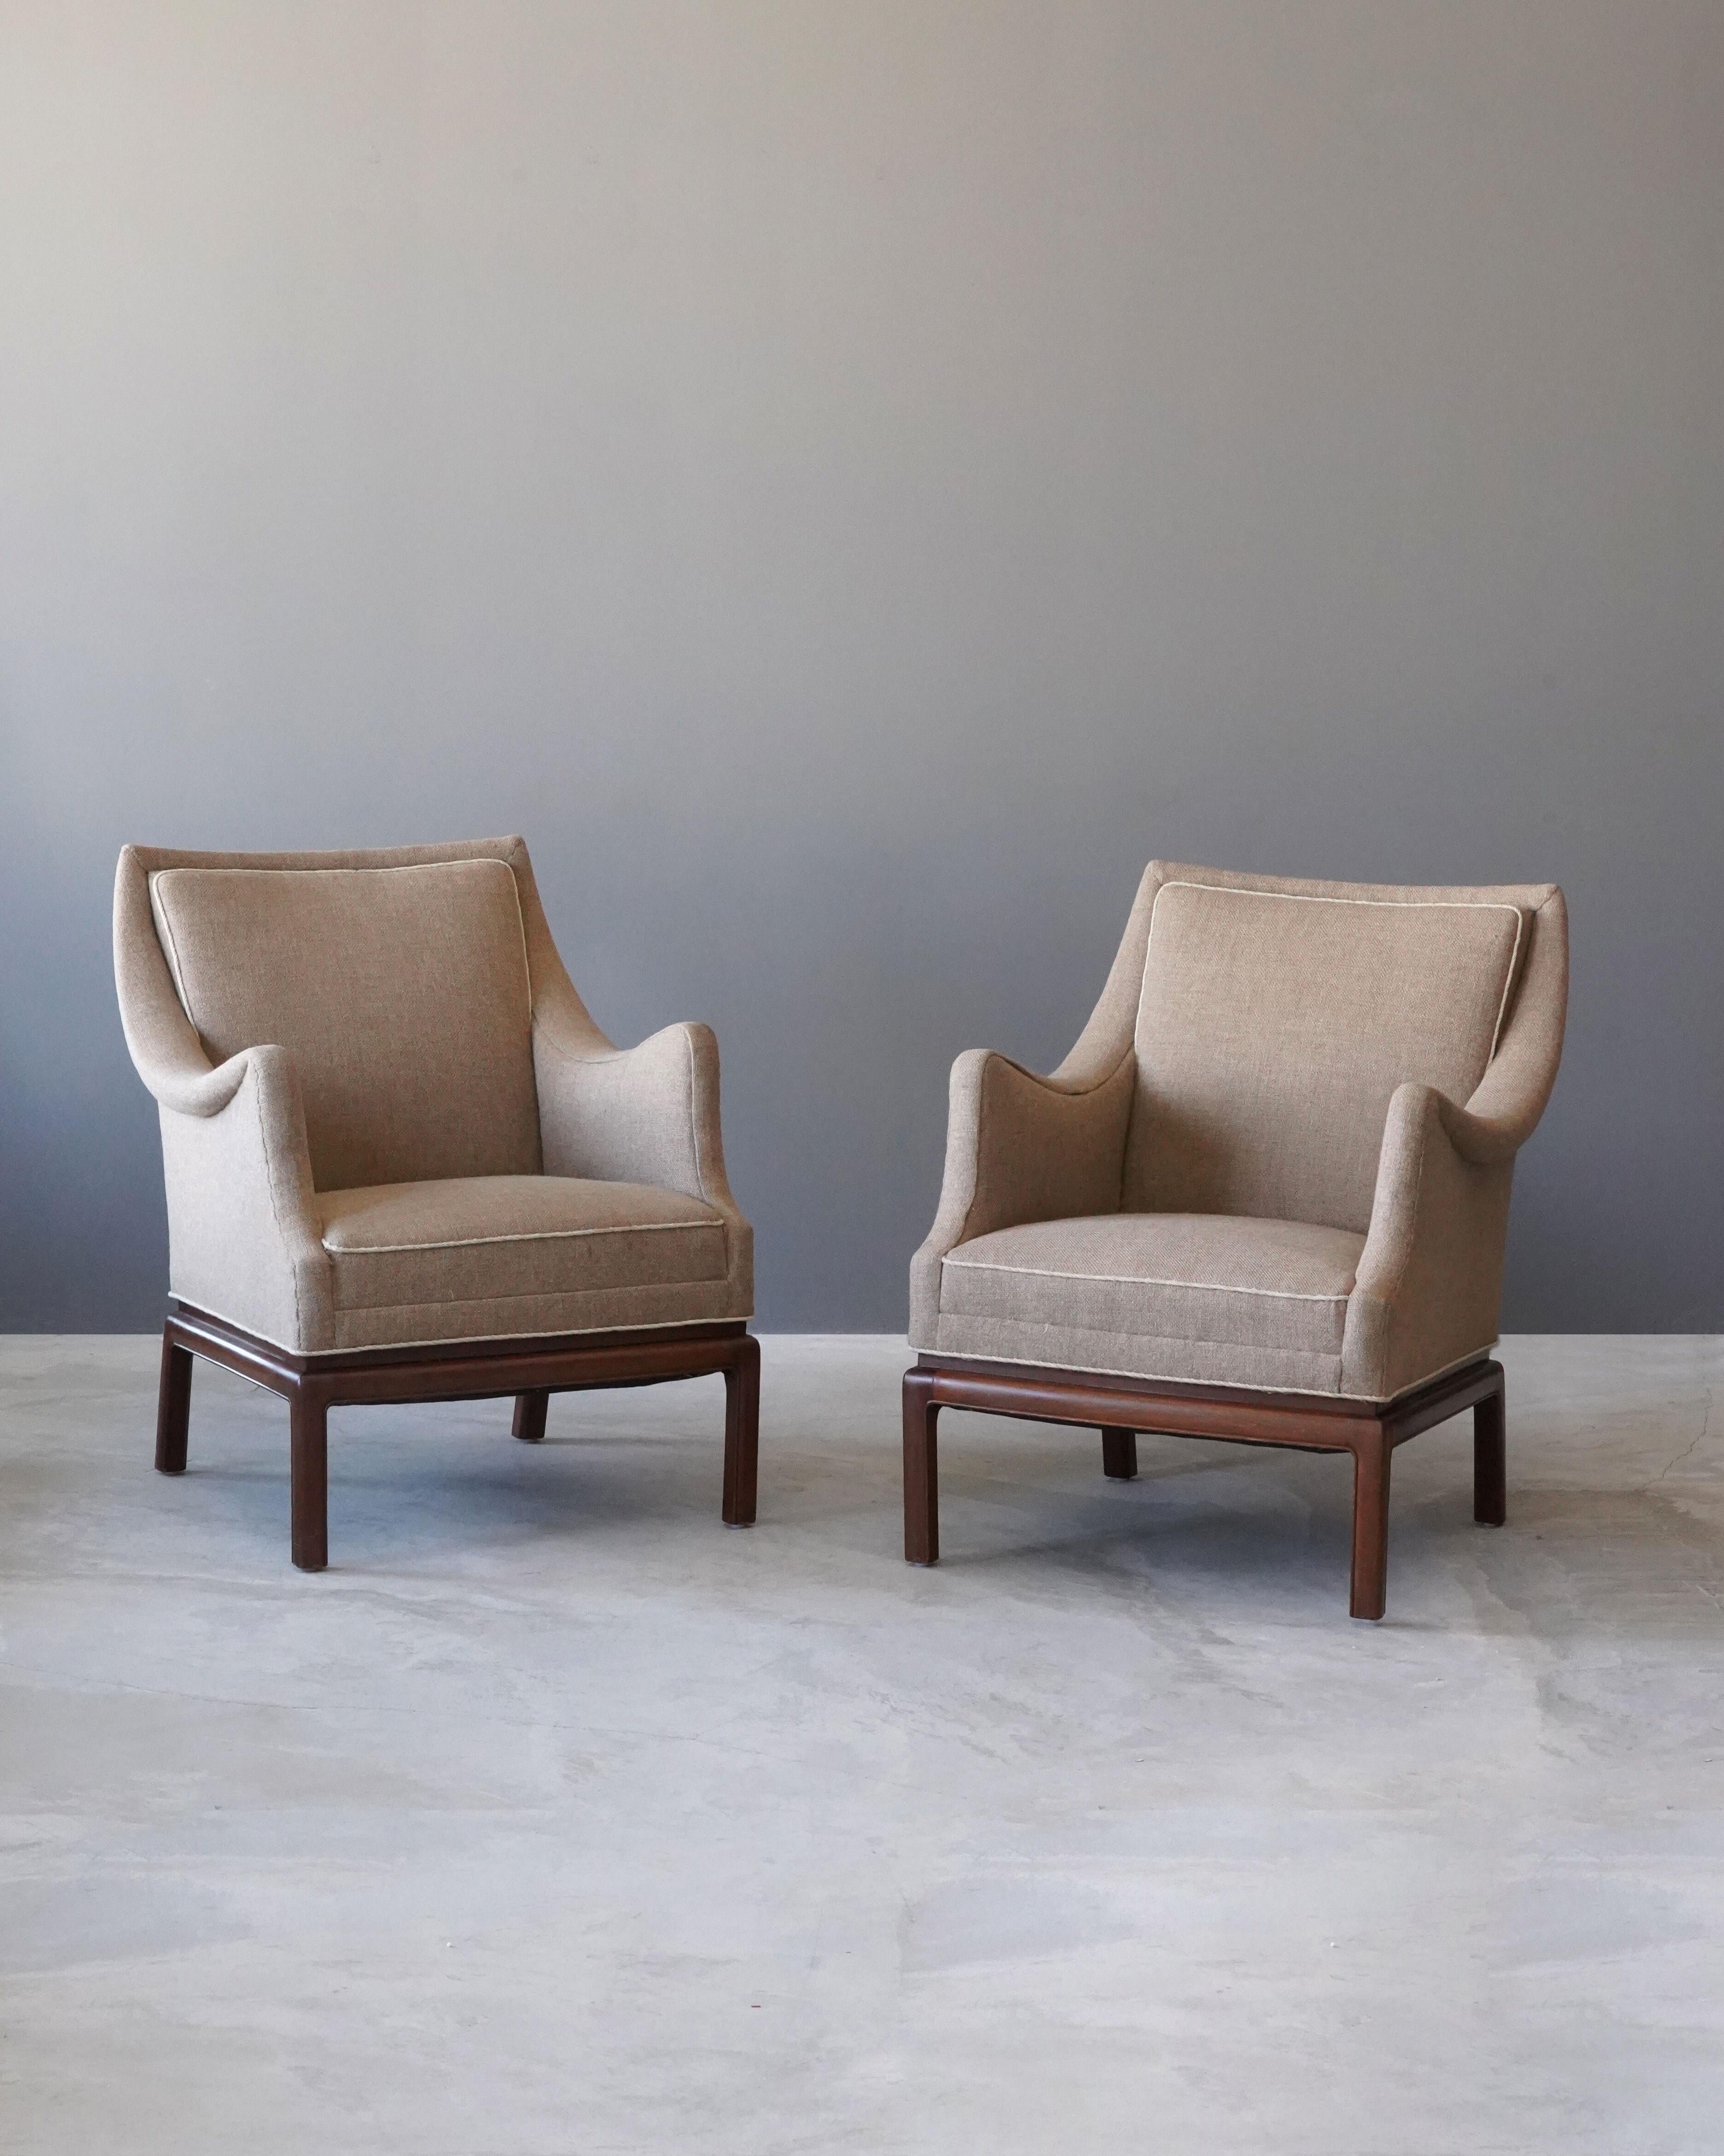 A pair of rare lounge chairs, designed by Frits Henningsen and produced in his workshop in Copenhagen, Denmark, 1940s-1950s. Henningsen was a member Copenhagen Cabinetmakers Guild.

Finely carved mahogany is paired with grey / beige fabric.